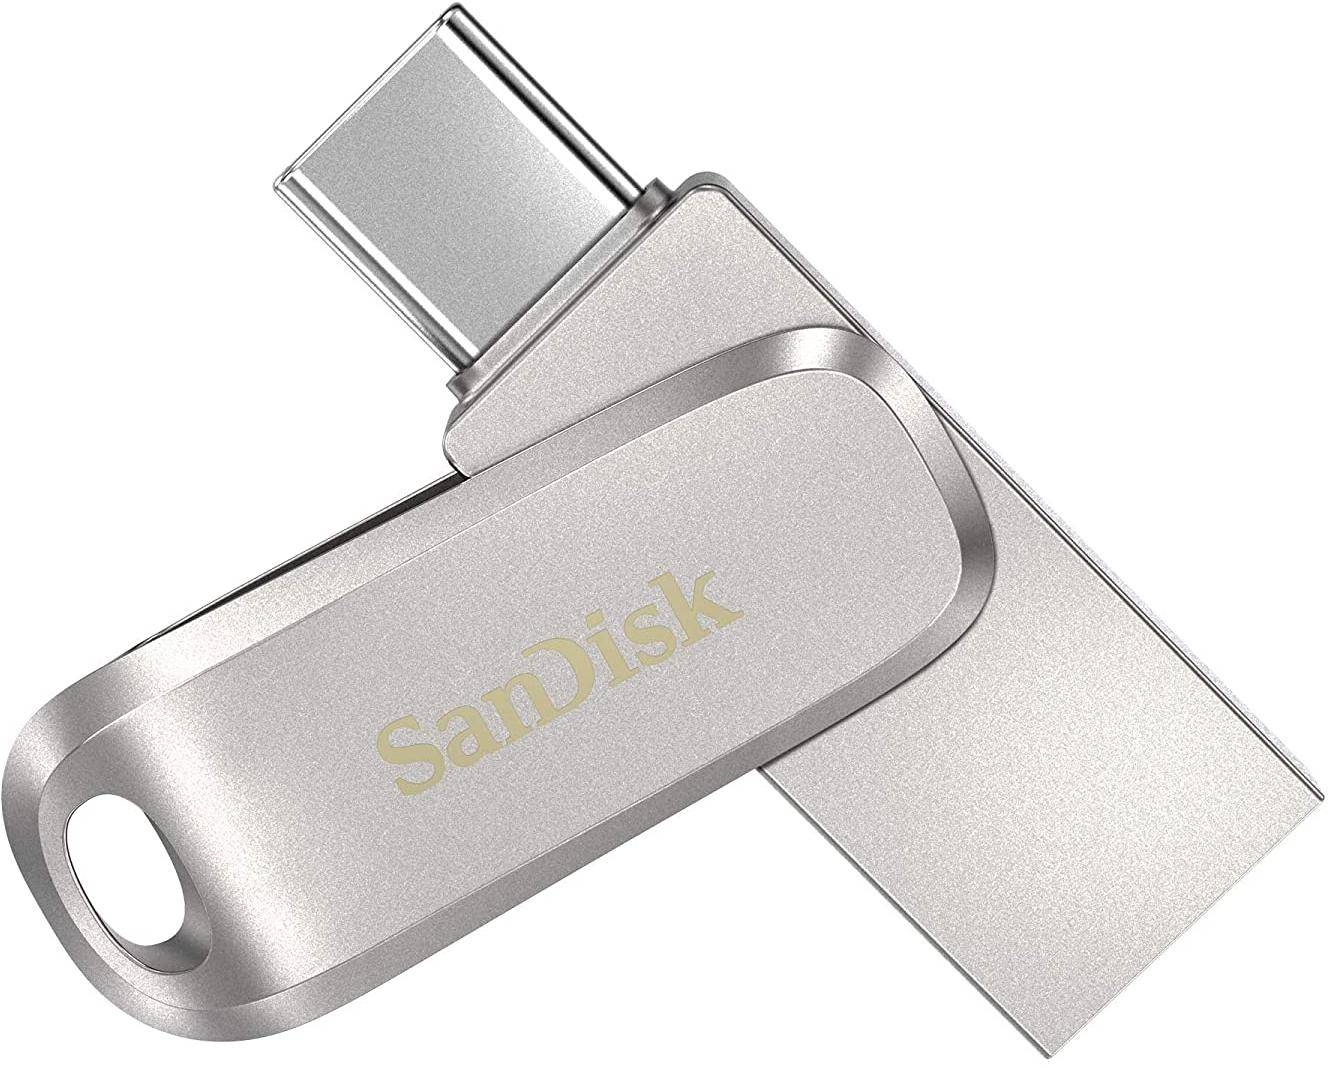 SanDisk Ultra Dual Drive Luxe Type C 128 GB  Flash Drive (SDDDC4-128G-I35) zoom image